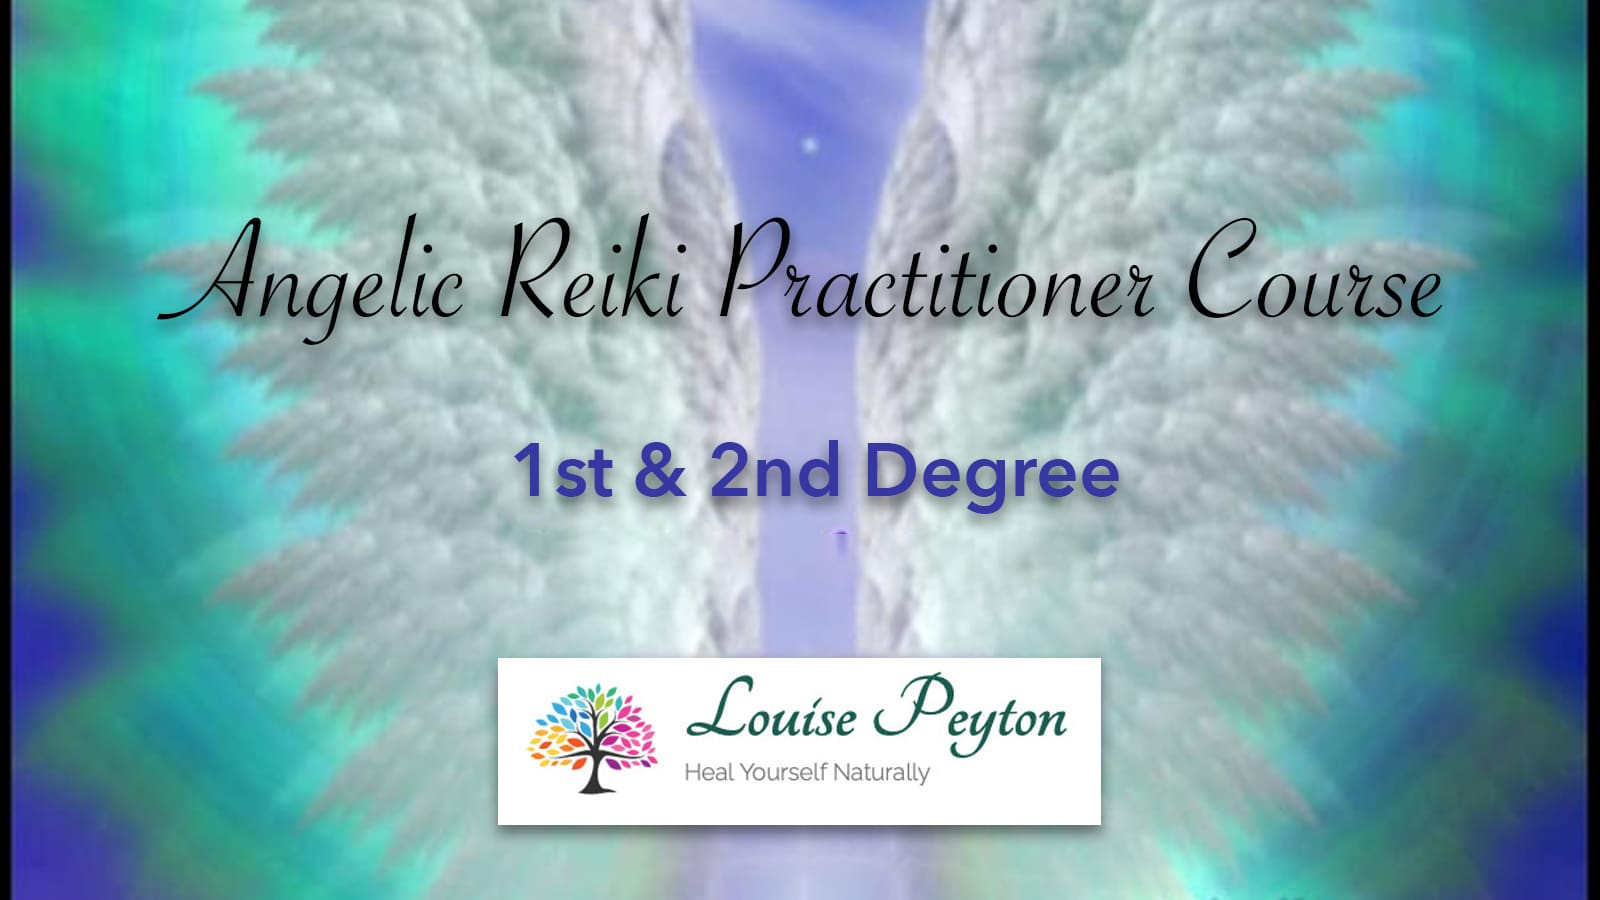 Thetford Bubbly Hub What's On and Events Angelic Reiki Practitioner Course